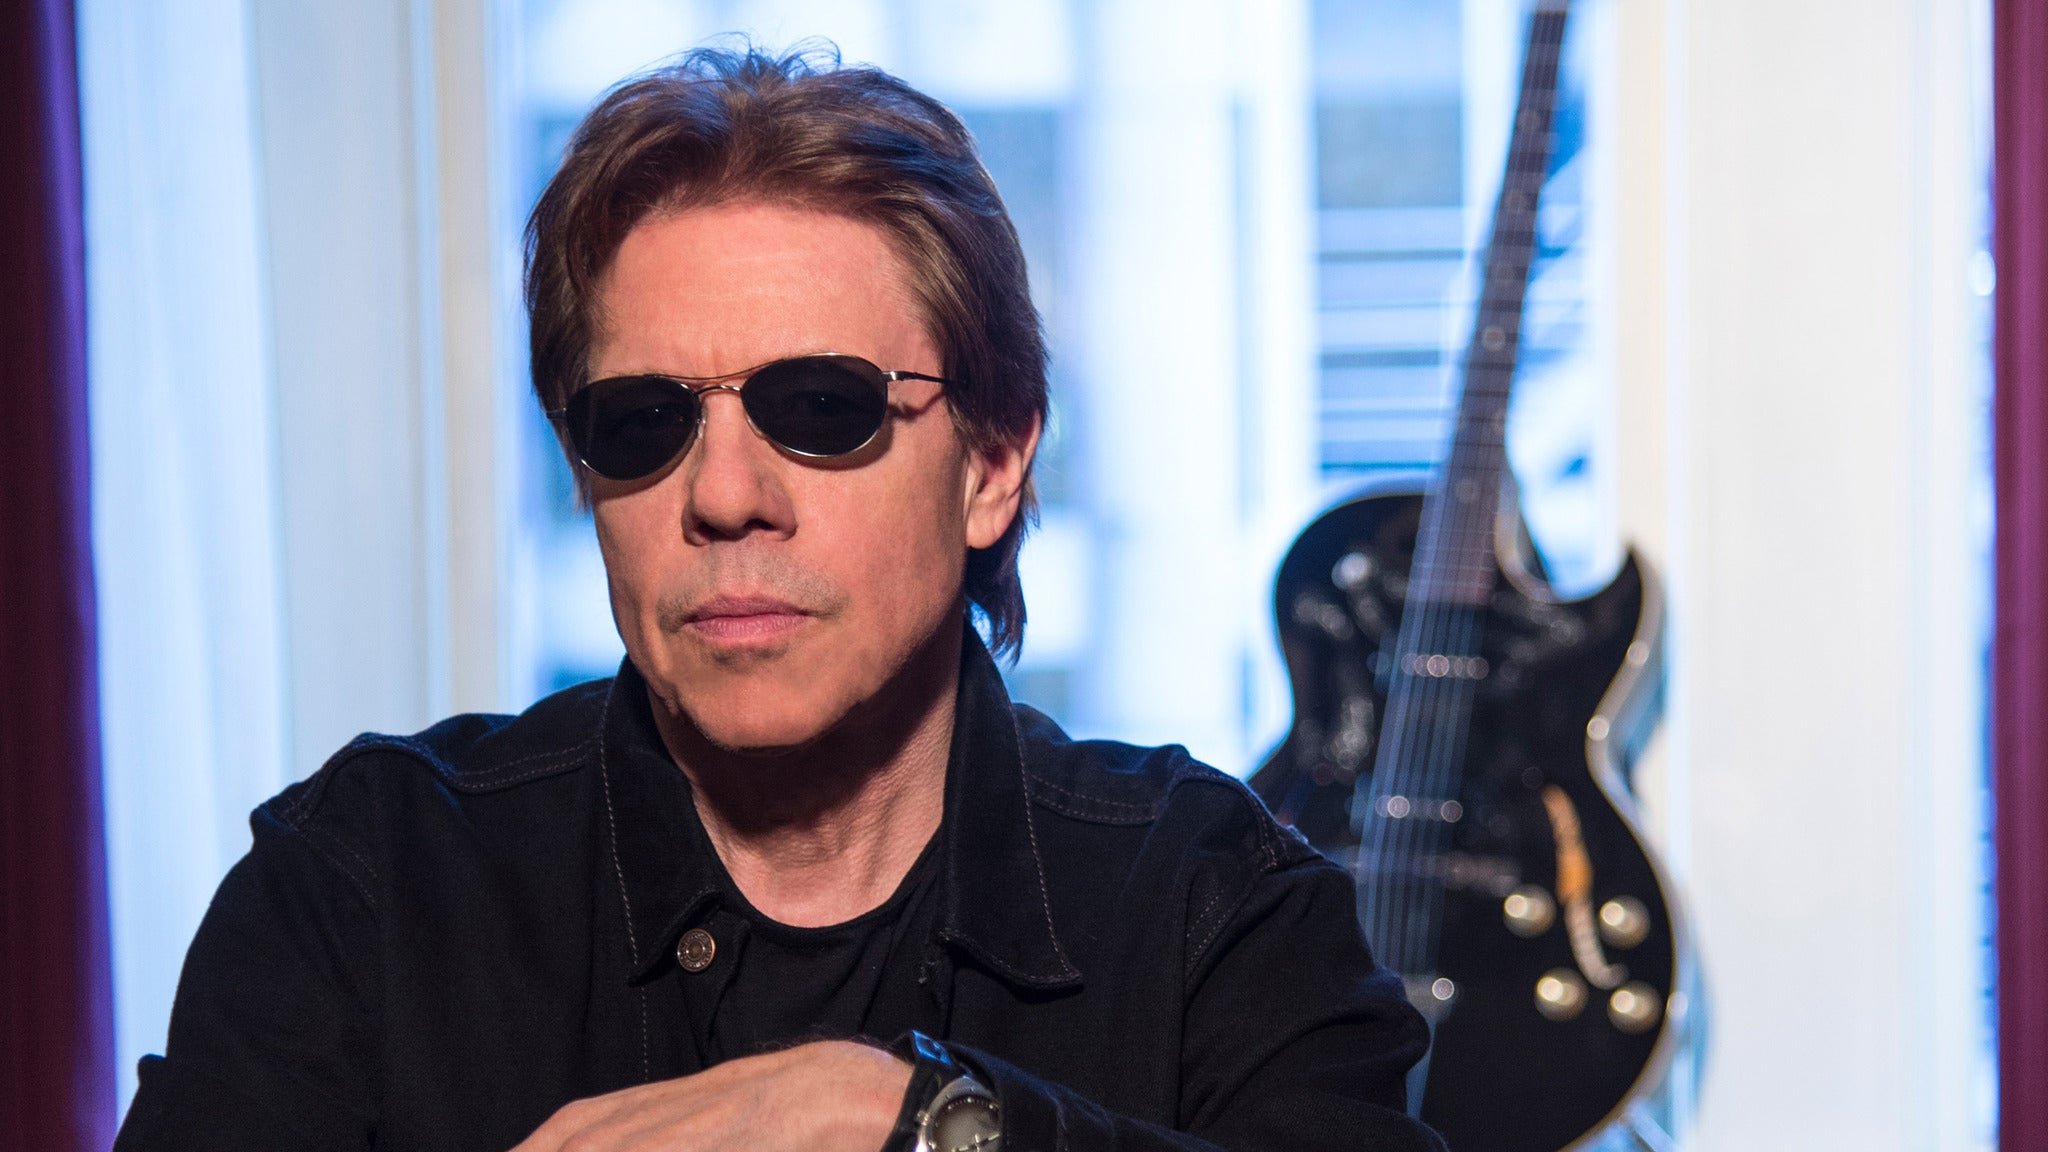 George Thorogood and The Destroyers - "Bad All Over The World"